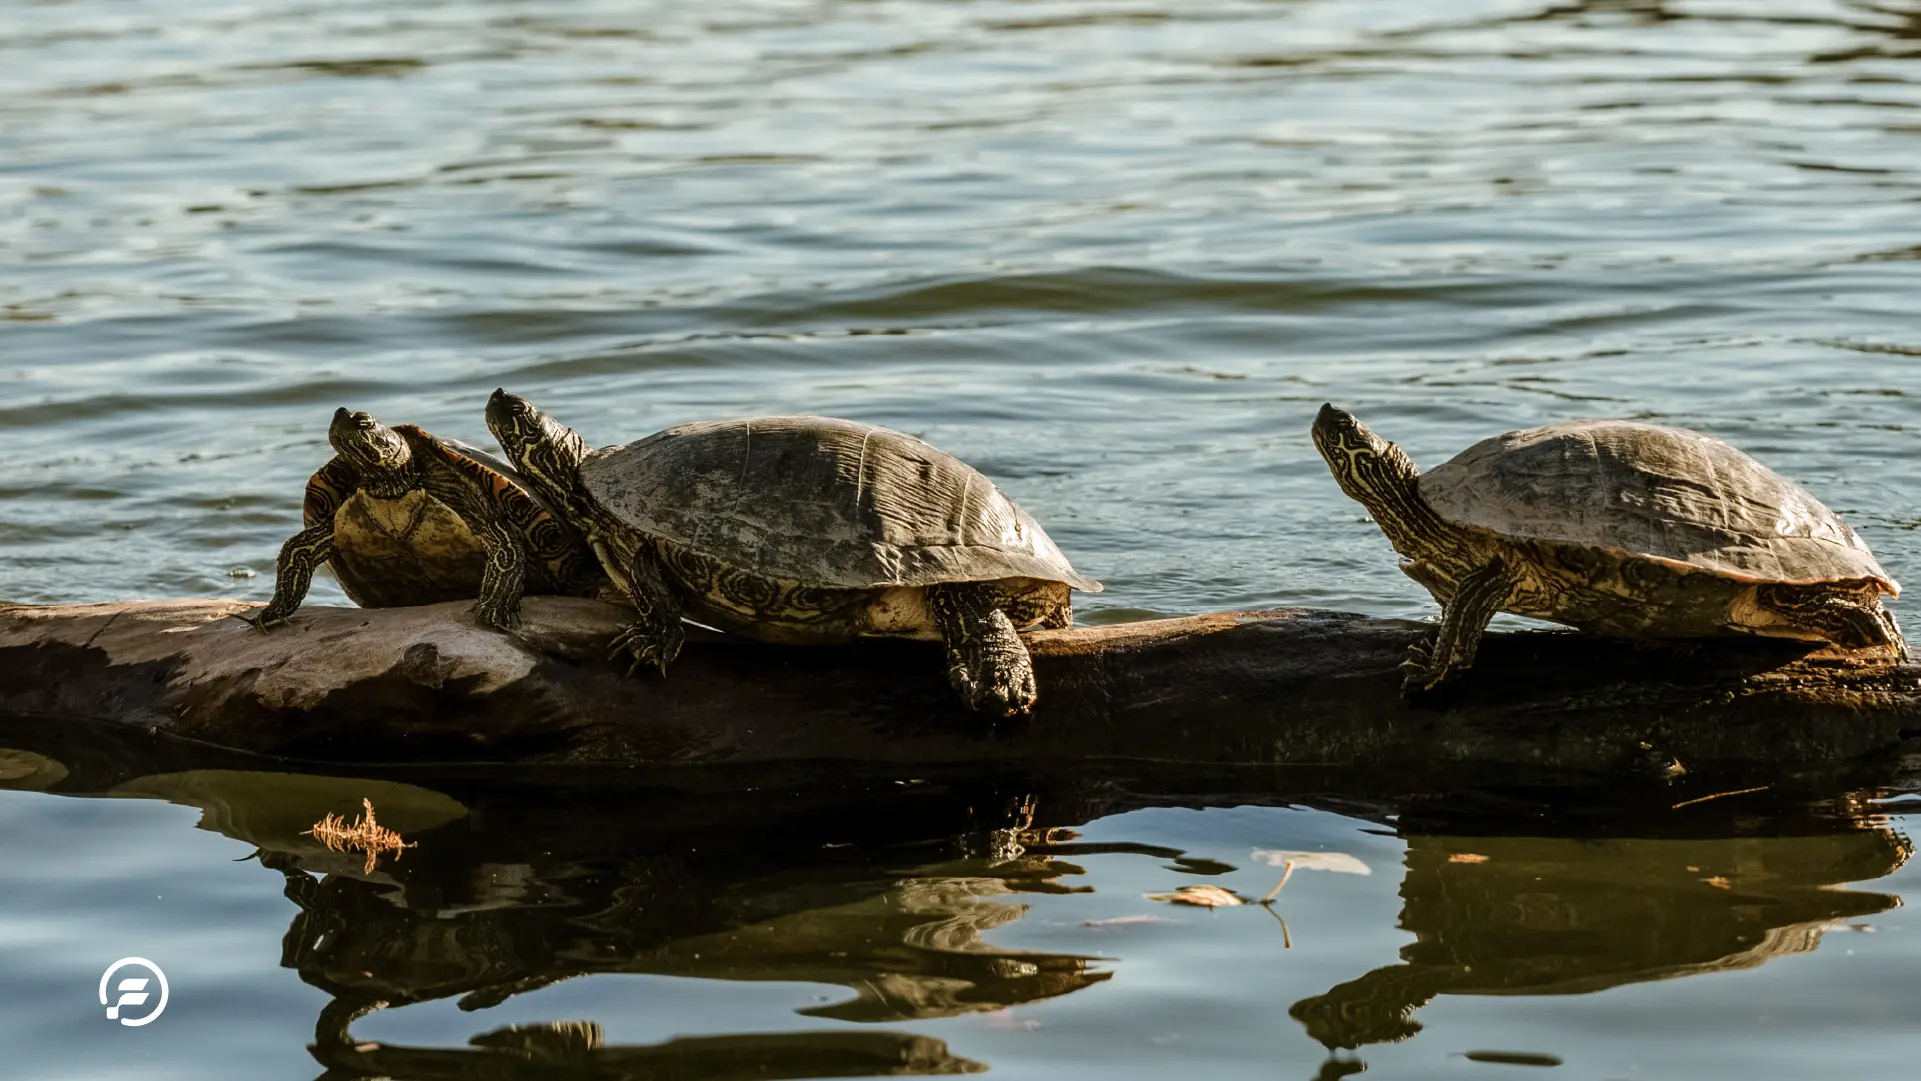 A few turtles hanging out on a log floating in the water.